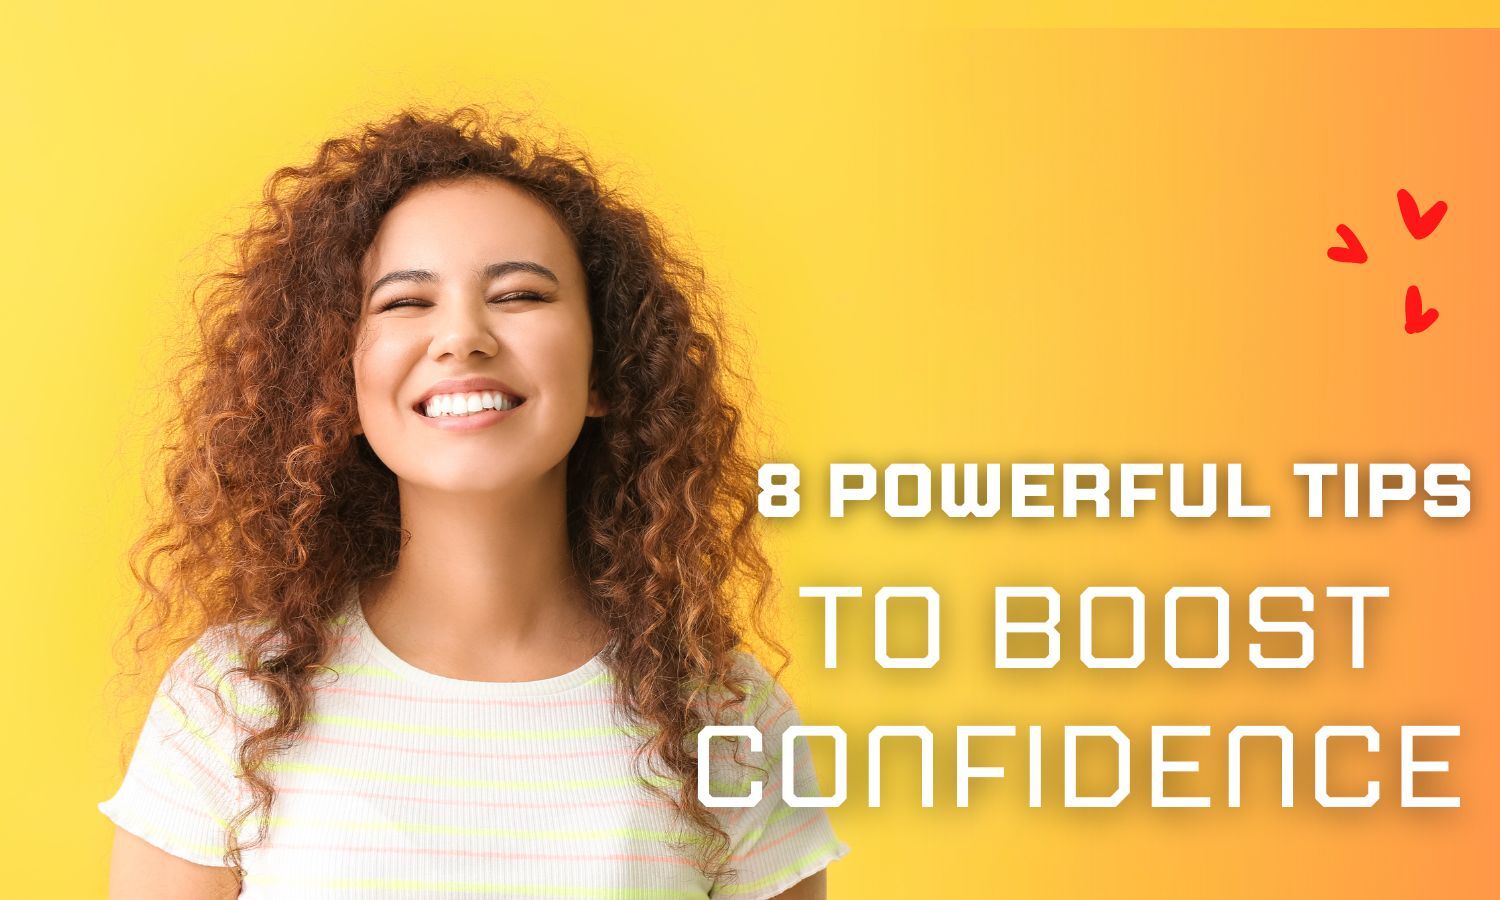 8 Powerful Tips to Boost Confidence